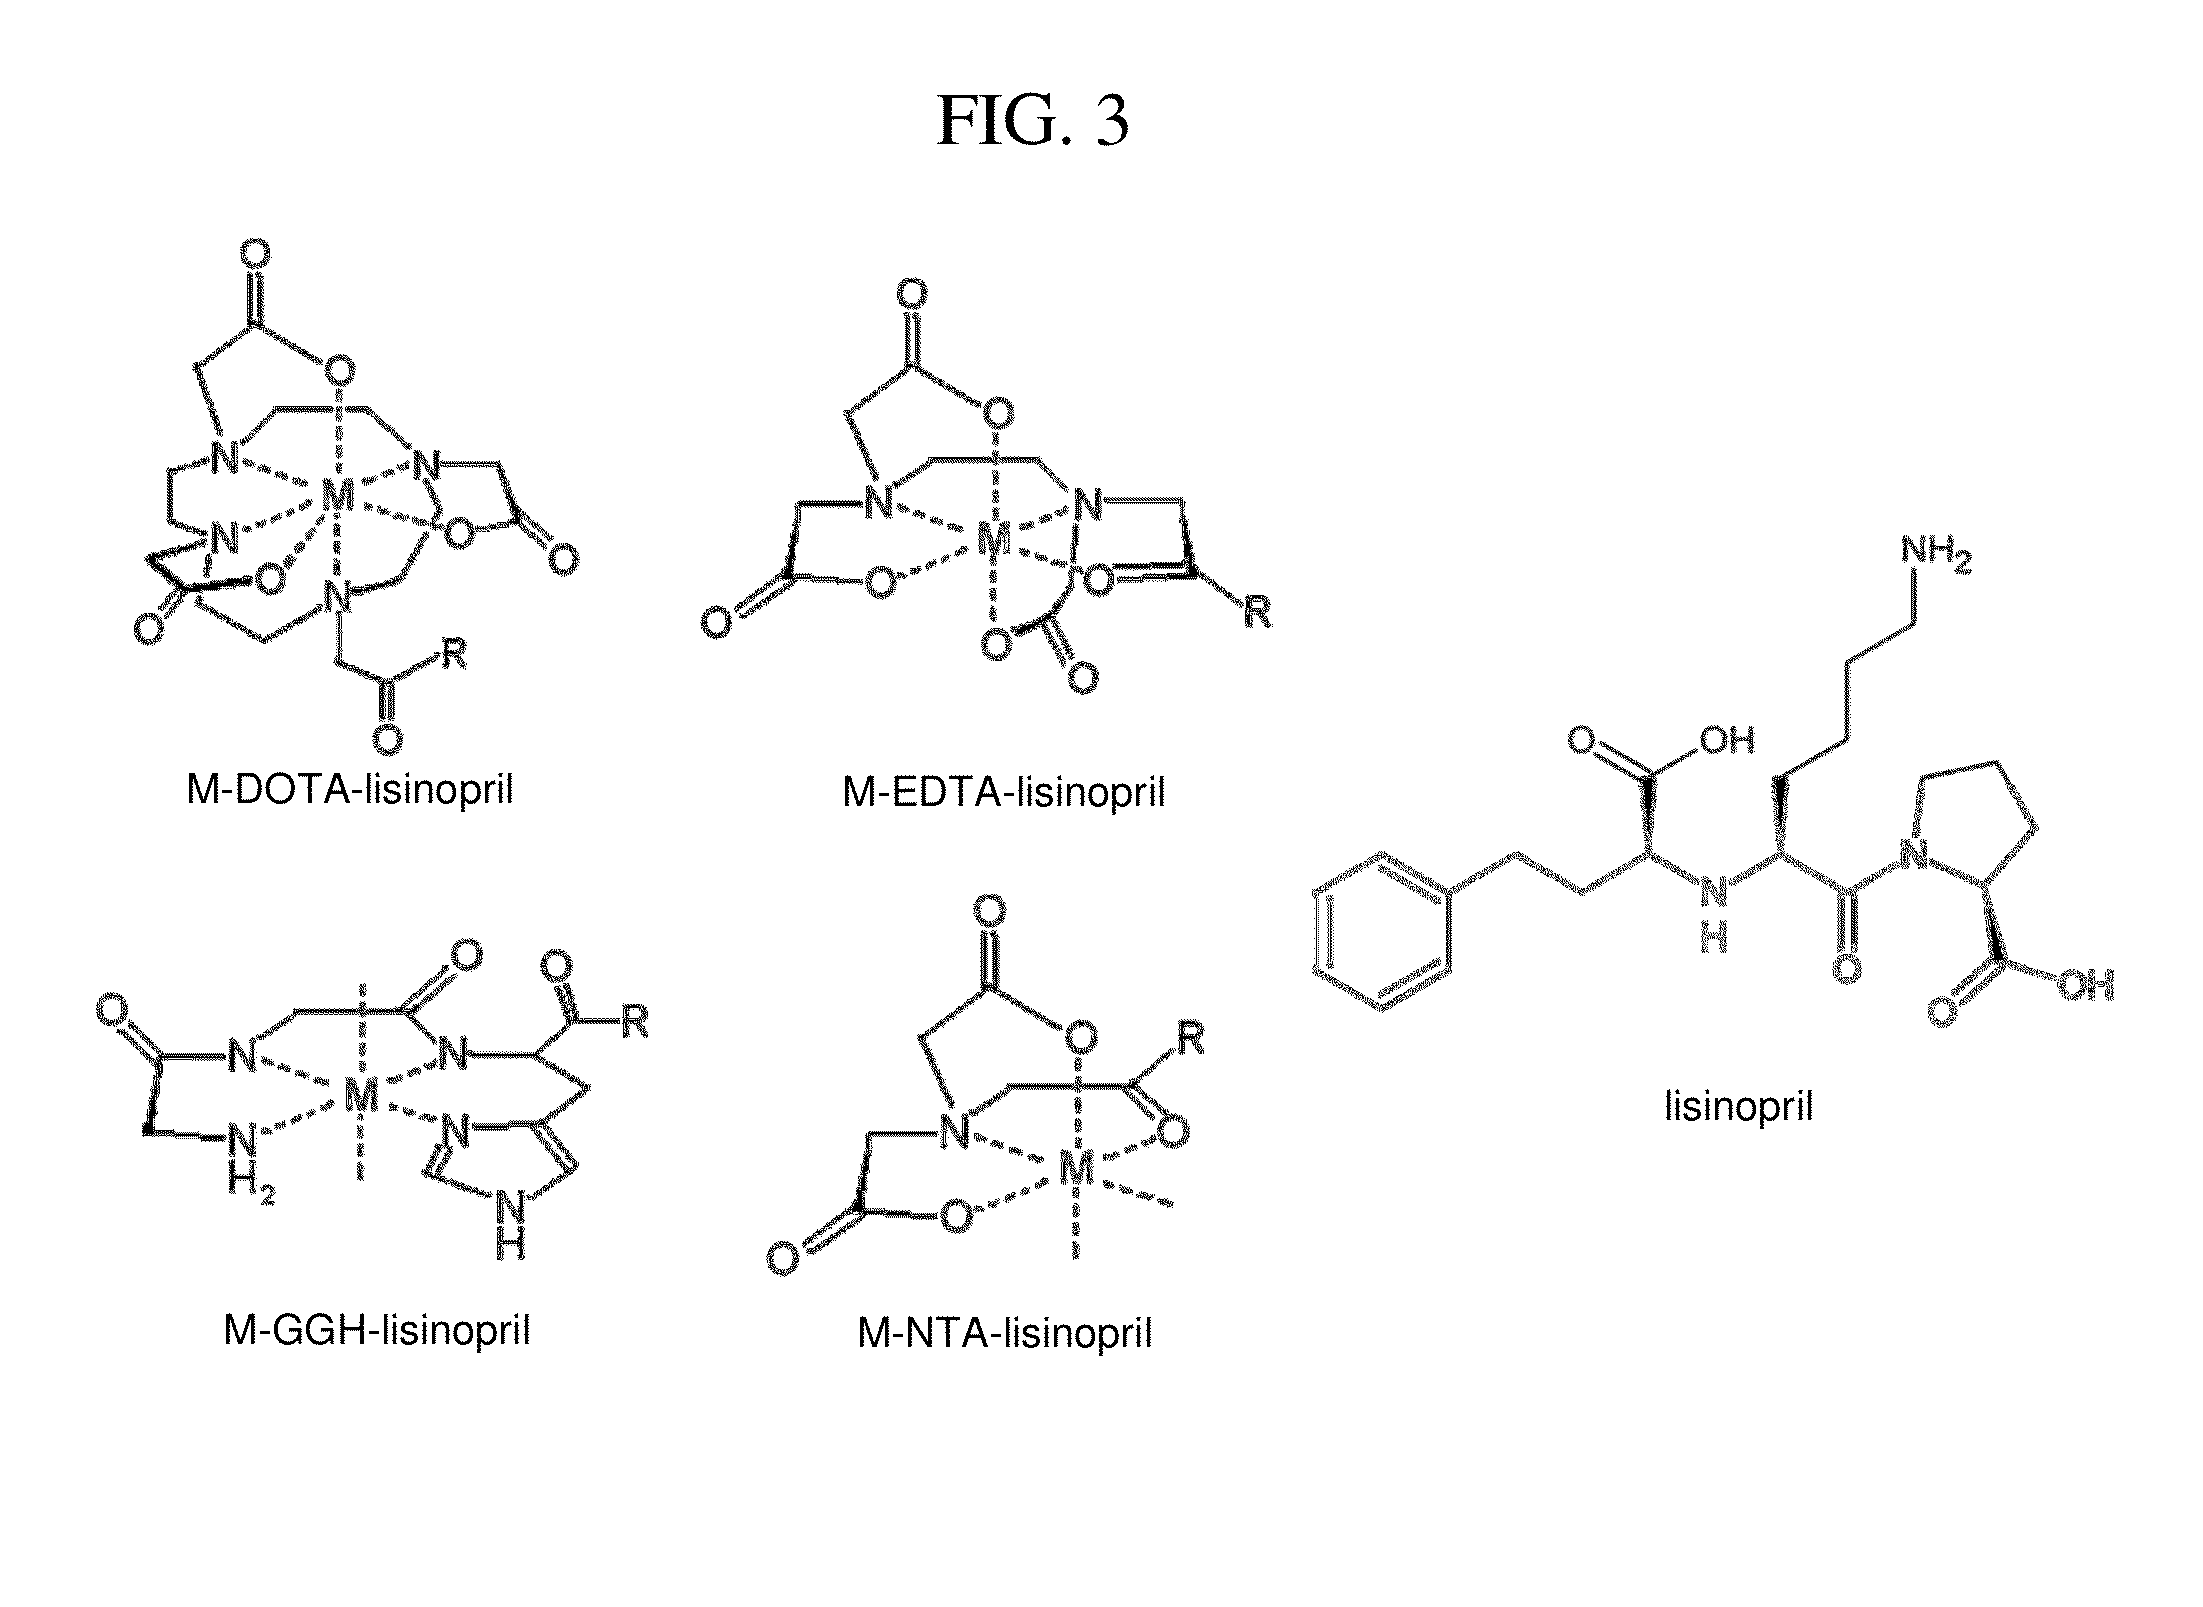 Metallodrugs Having Improved Pharmacological Properties, and Methods of Manufacture and Use Thereof